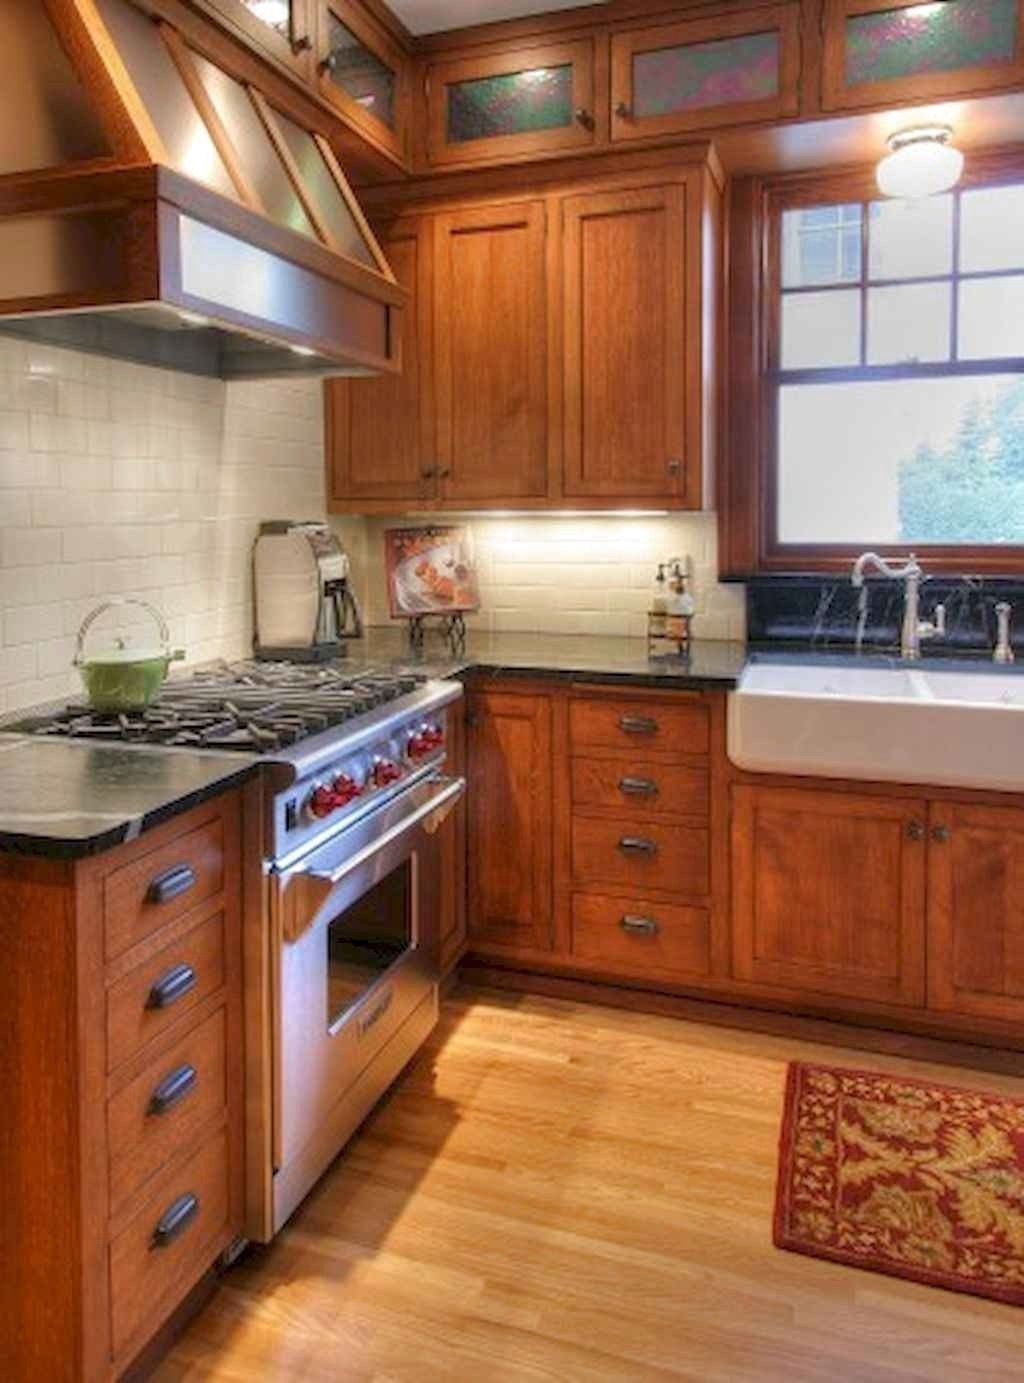 Kitchen oak cabinets wall color